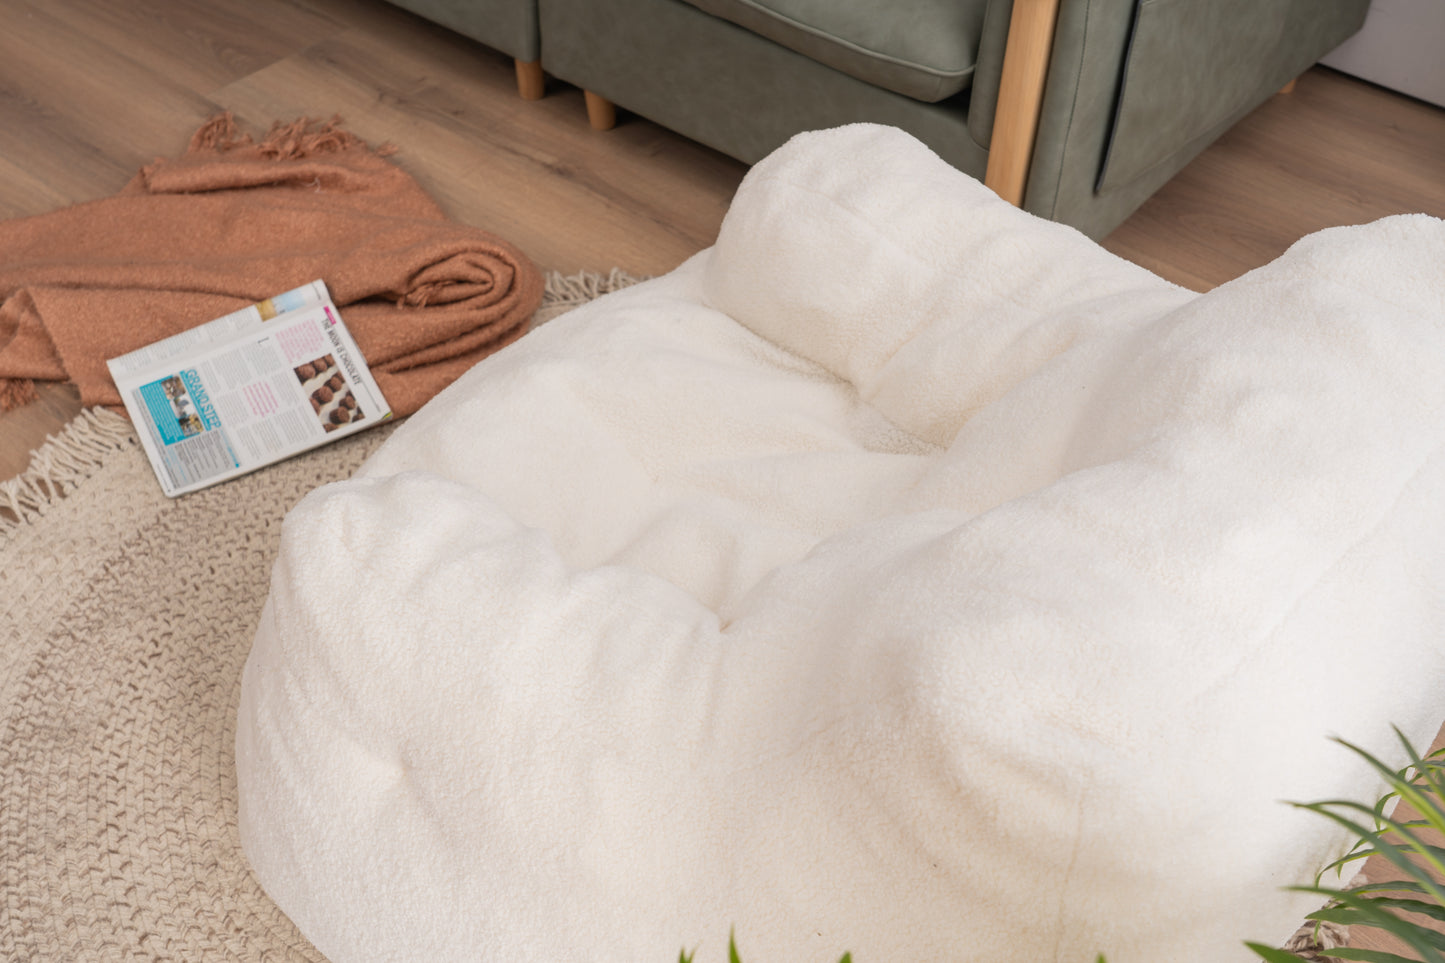 Soft Tufted Foam Bean Bag Chair With Teddy Fabric Ivory White